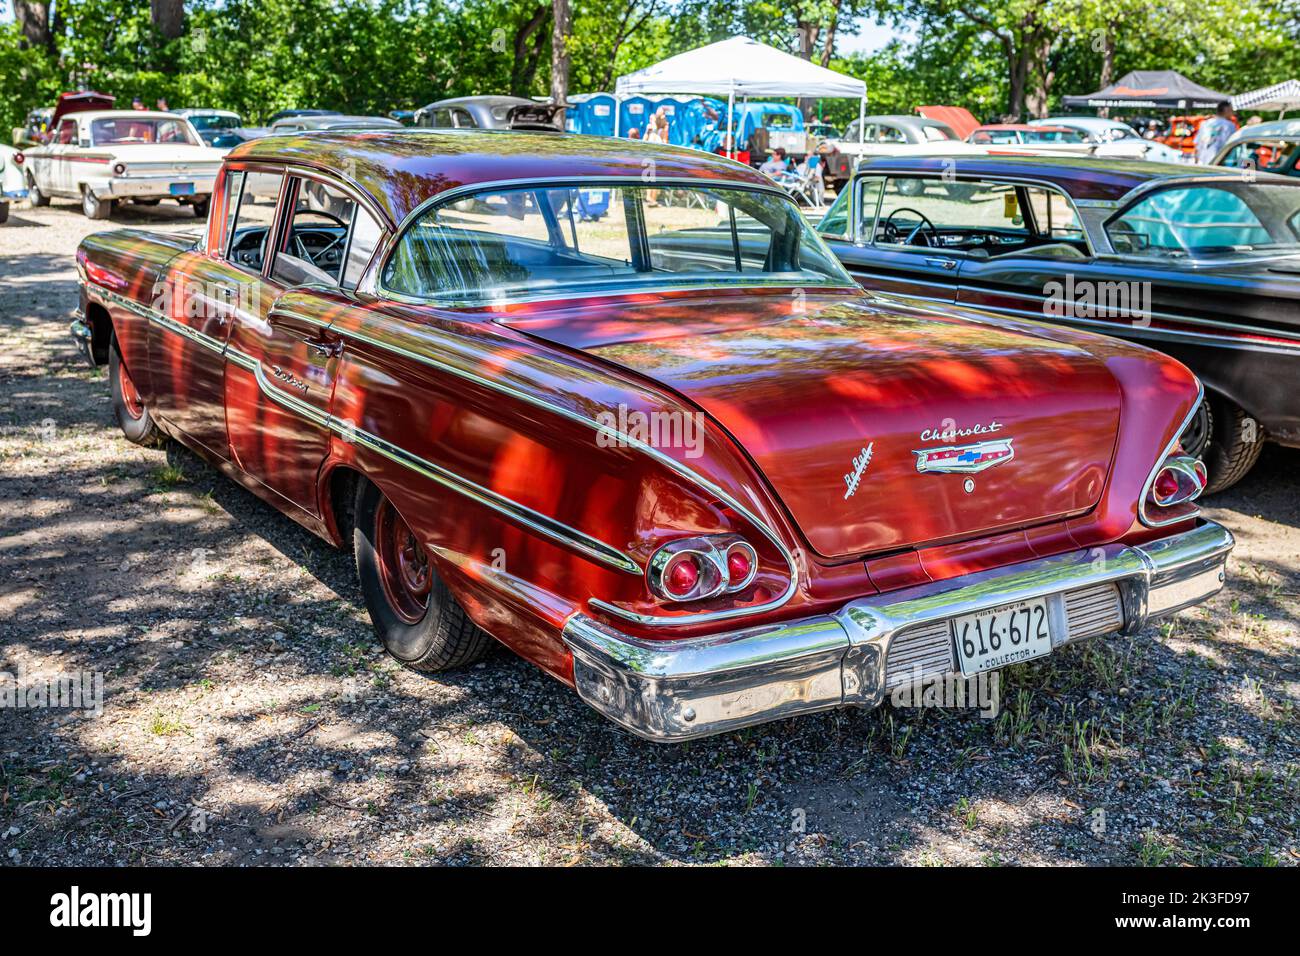 Falcon Heights, MN - June 18, 2022: High perspective rear corner view of a 1958 Chevrolet Delray 4 Door Sedan at a local car show. Stock Photo